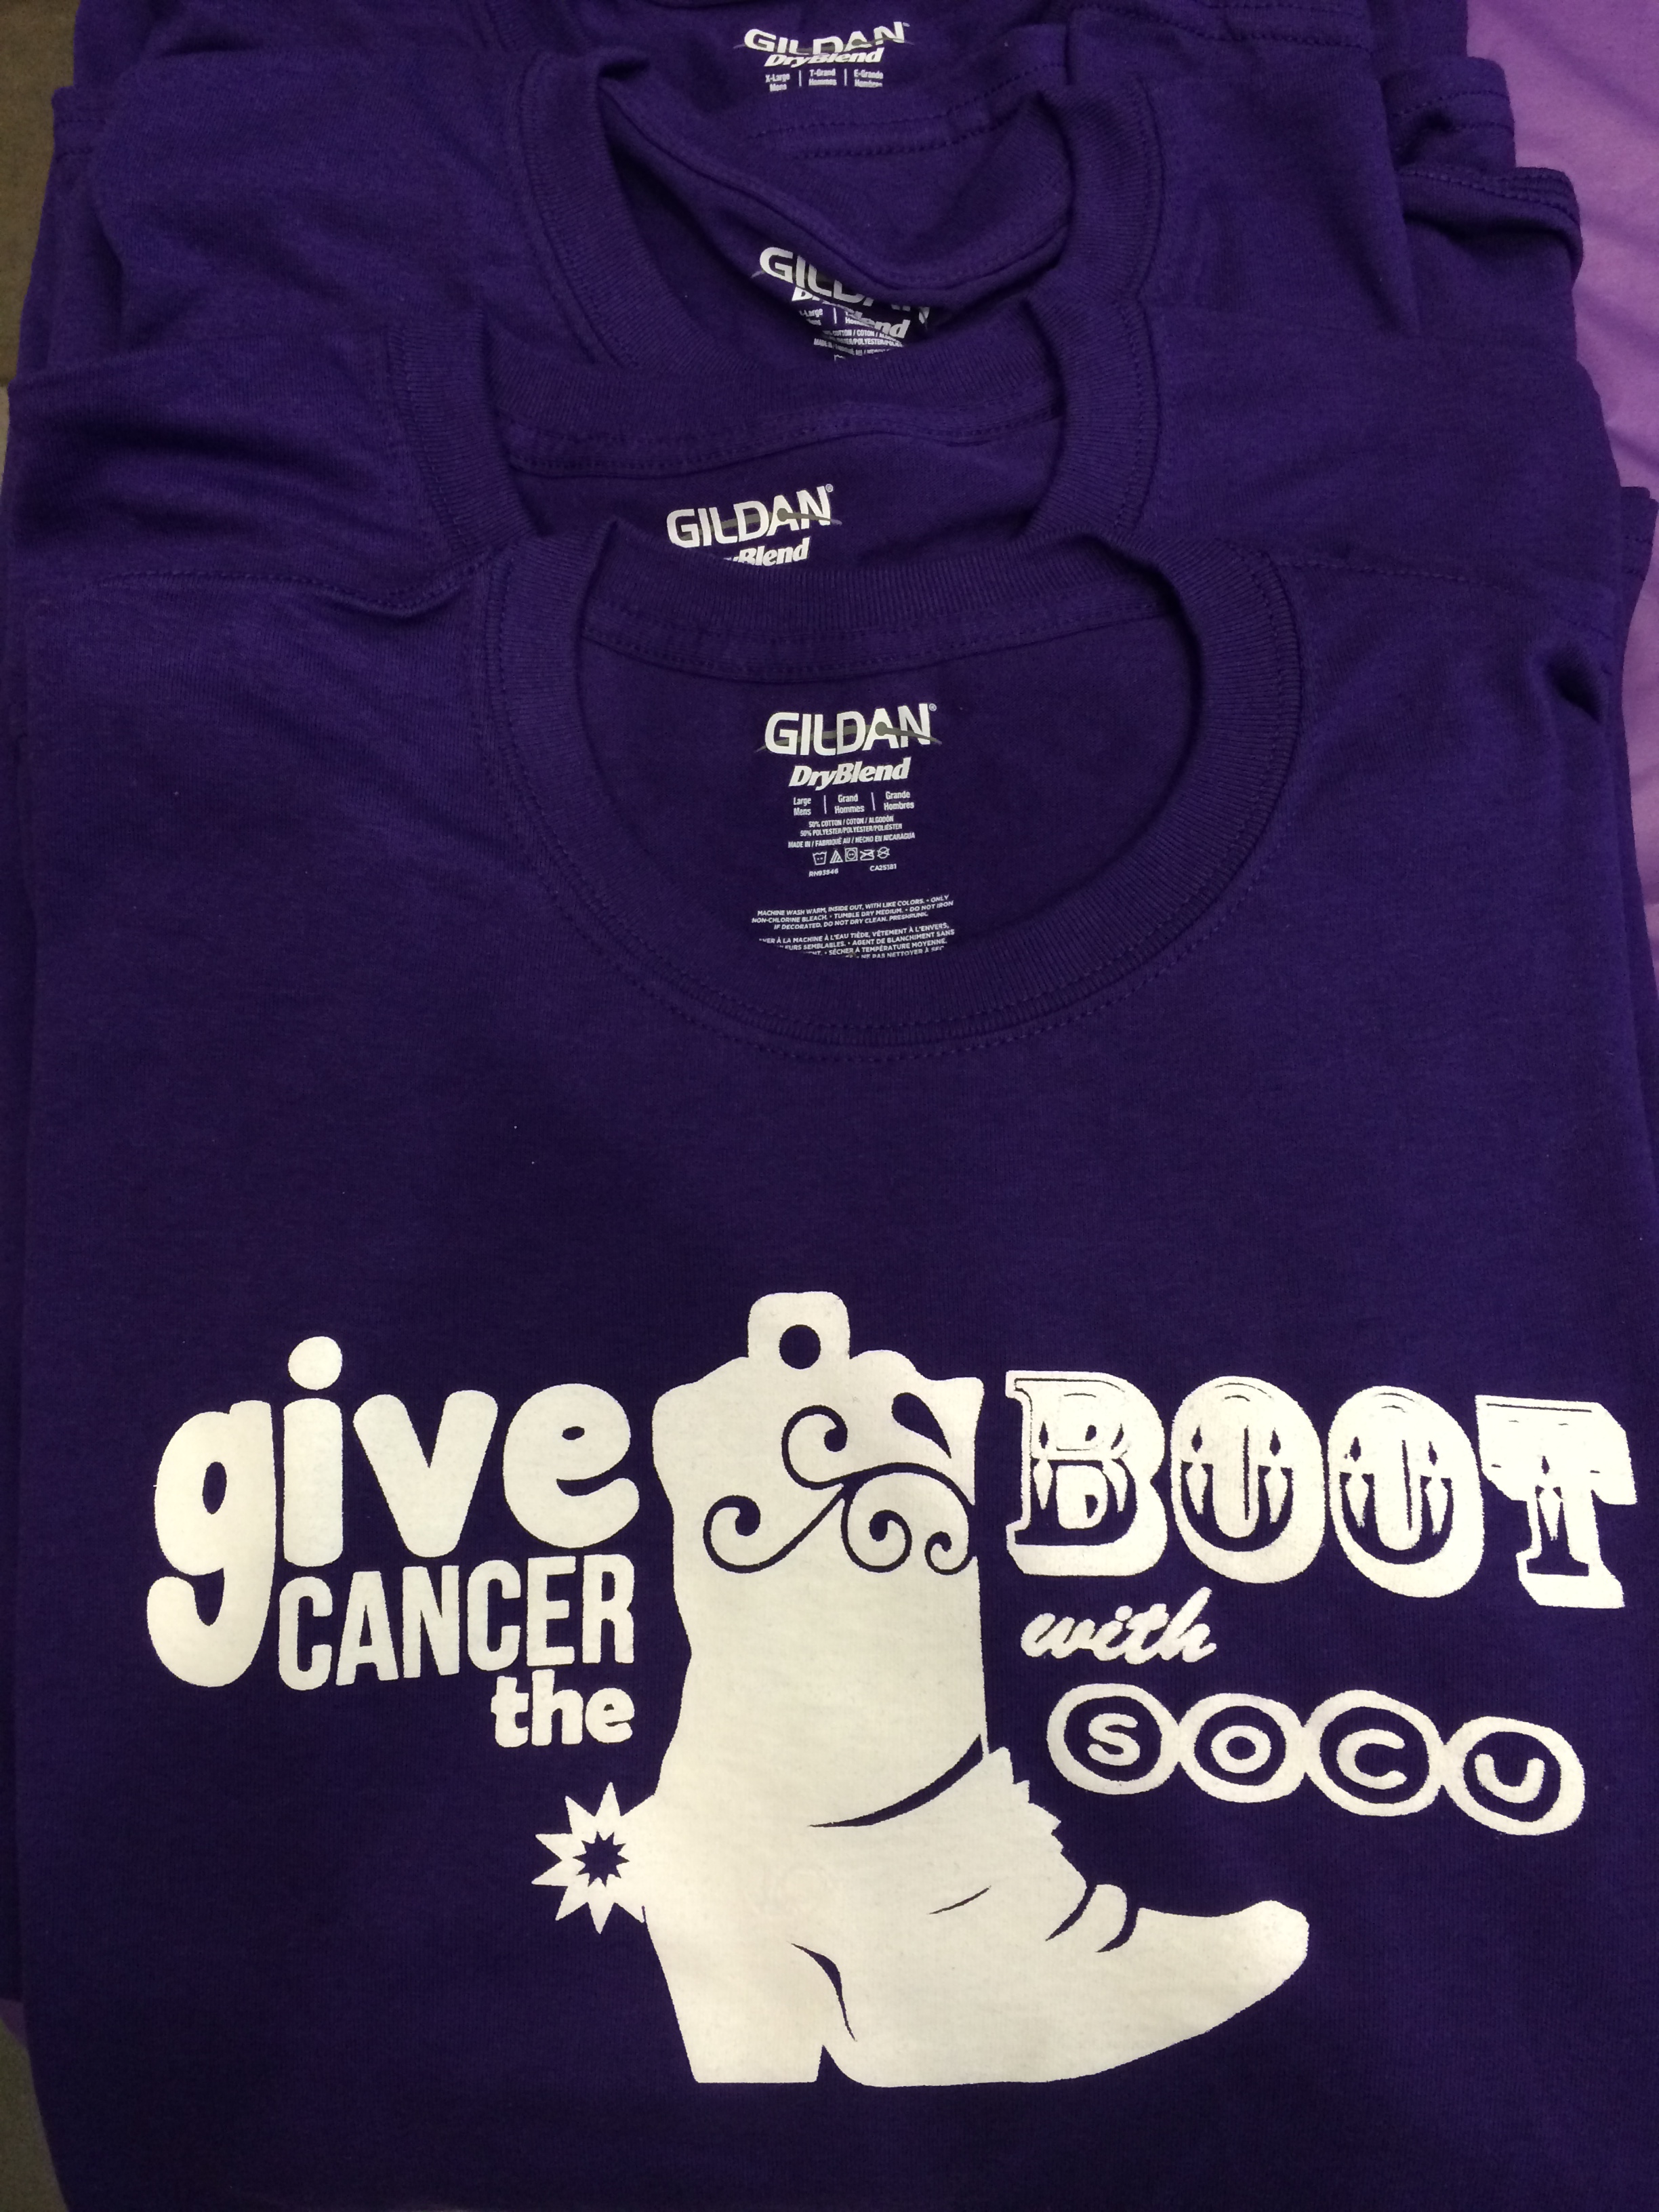 Give cancer the boot purple shirt